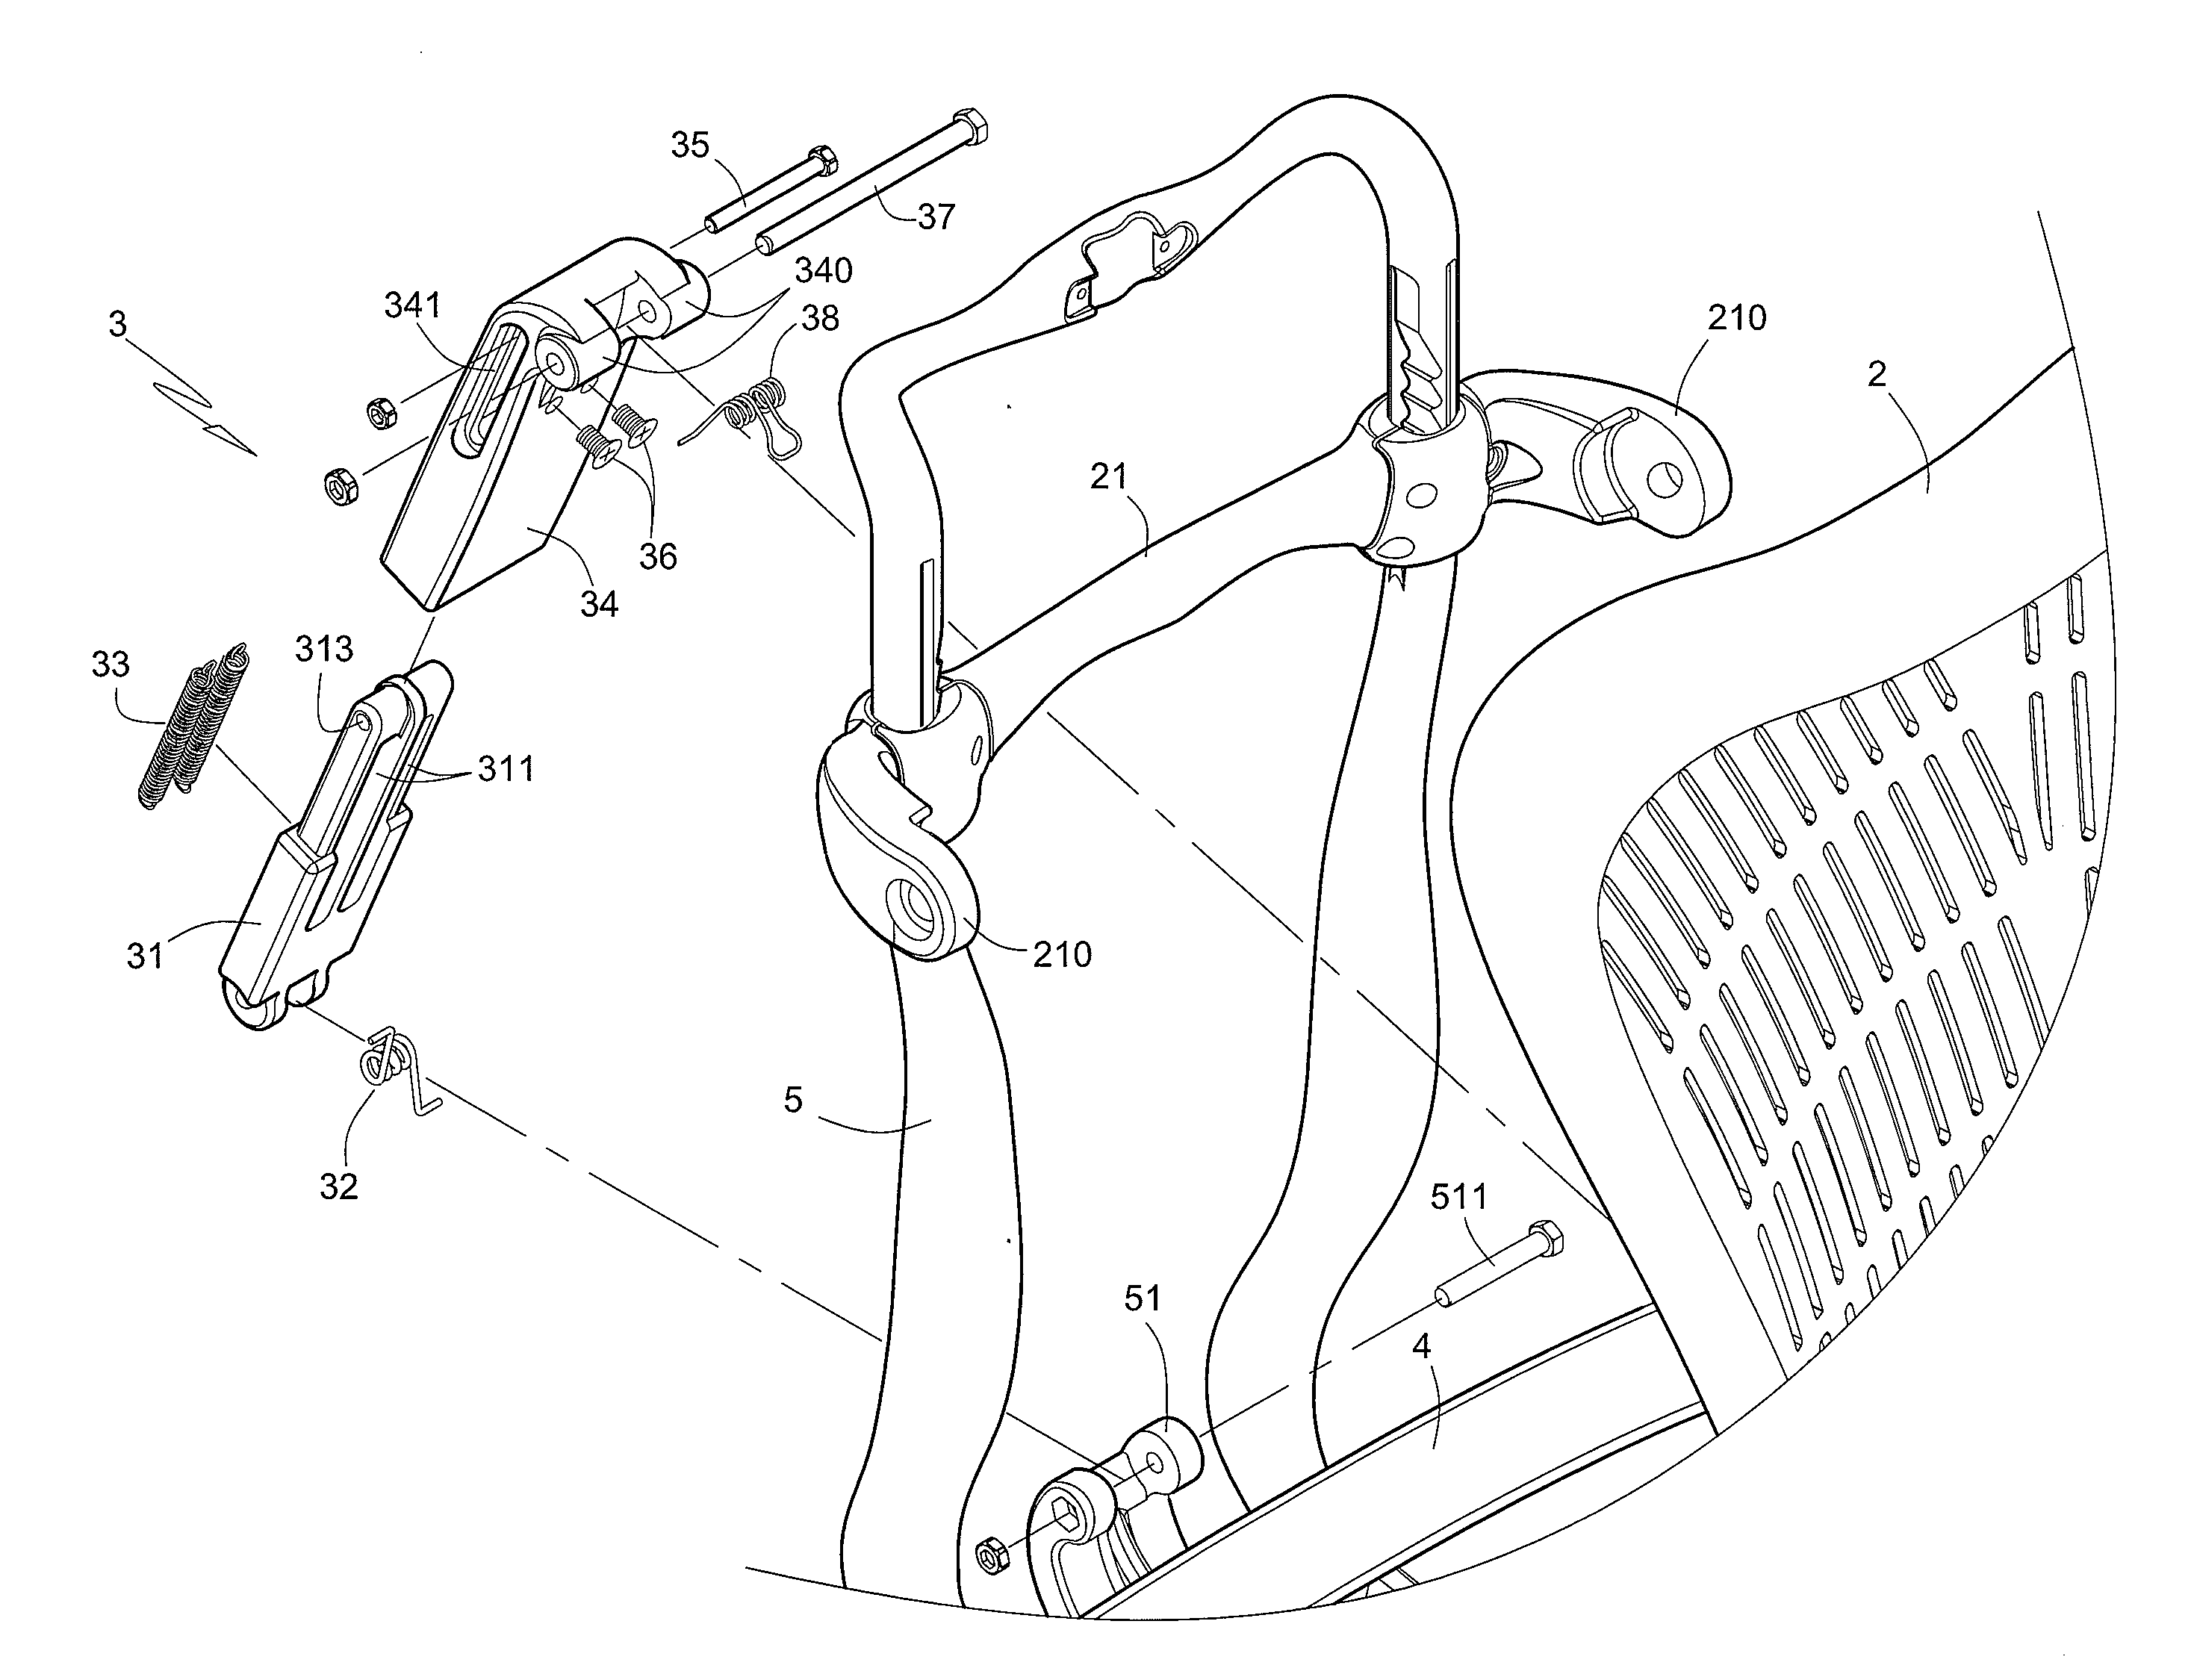 Resilient Lower-Back Supporting Device Capable of Vertical Adjustment Along with Backrest of Chair